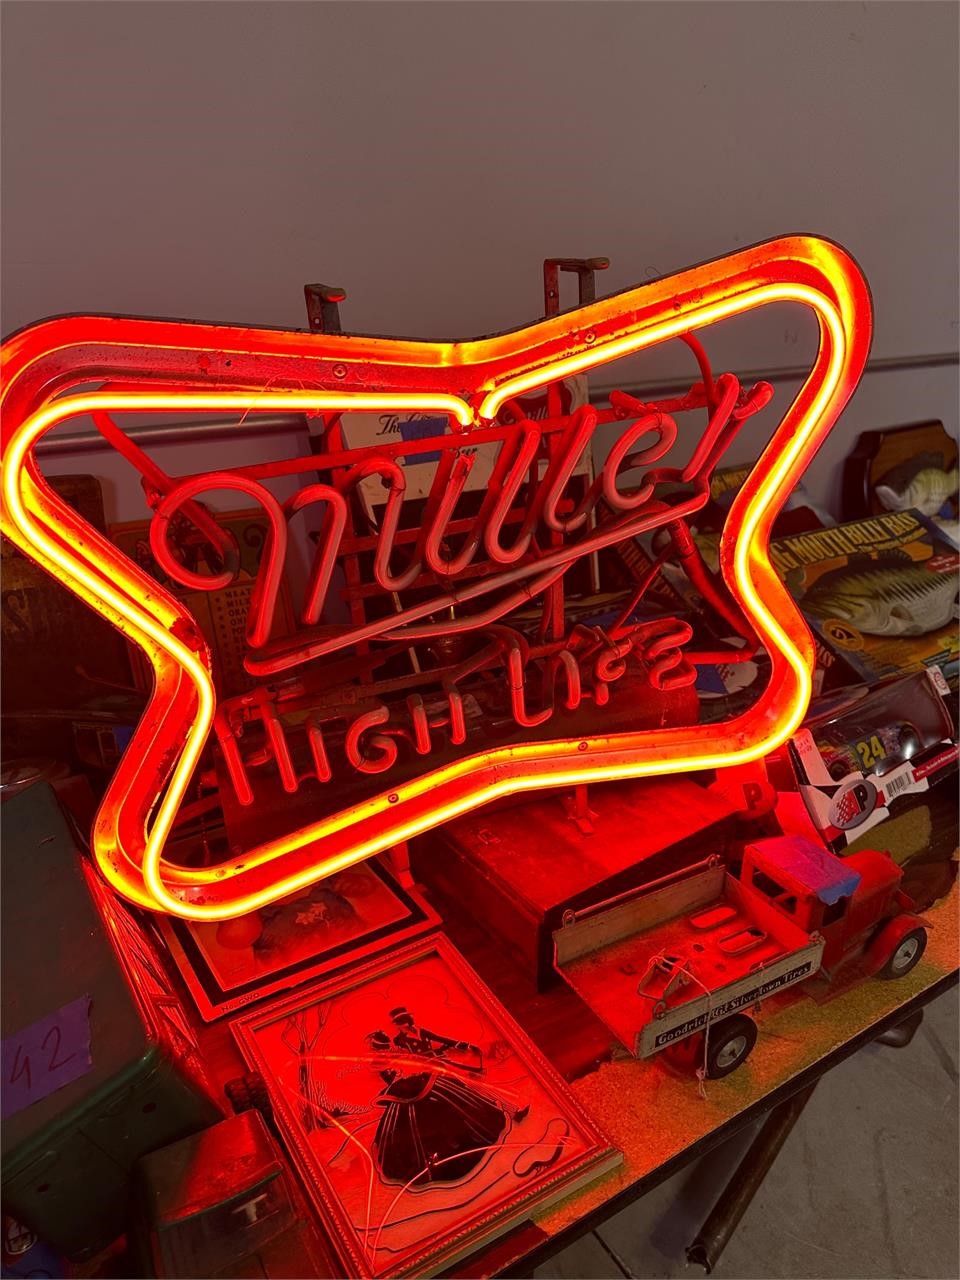 VTG COLLECTIBLE NEON SIGN MILLER BEER MADE IN USA